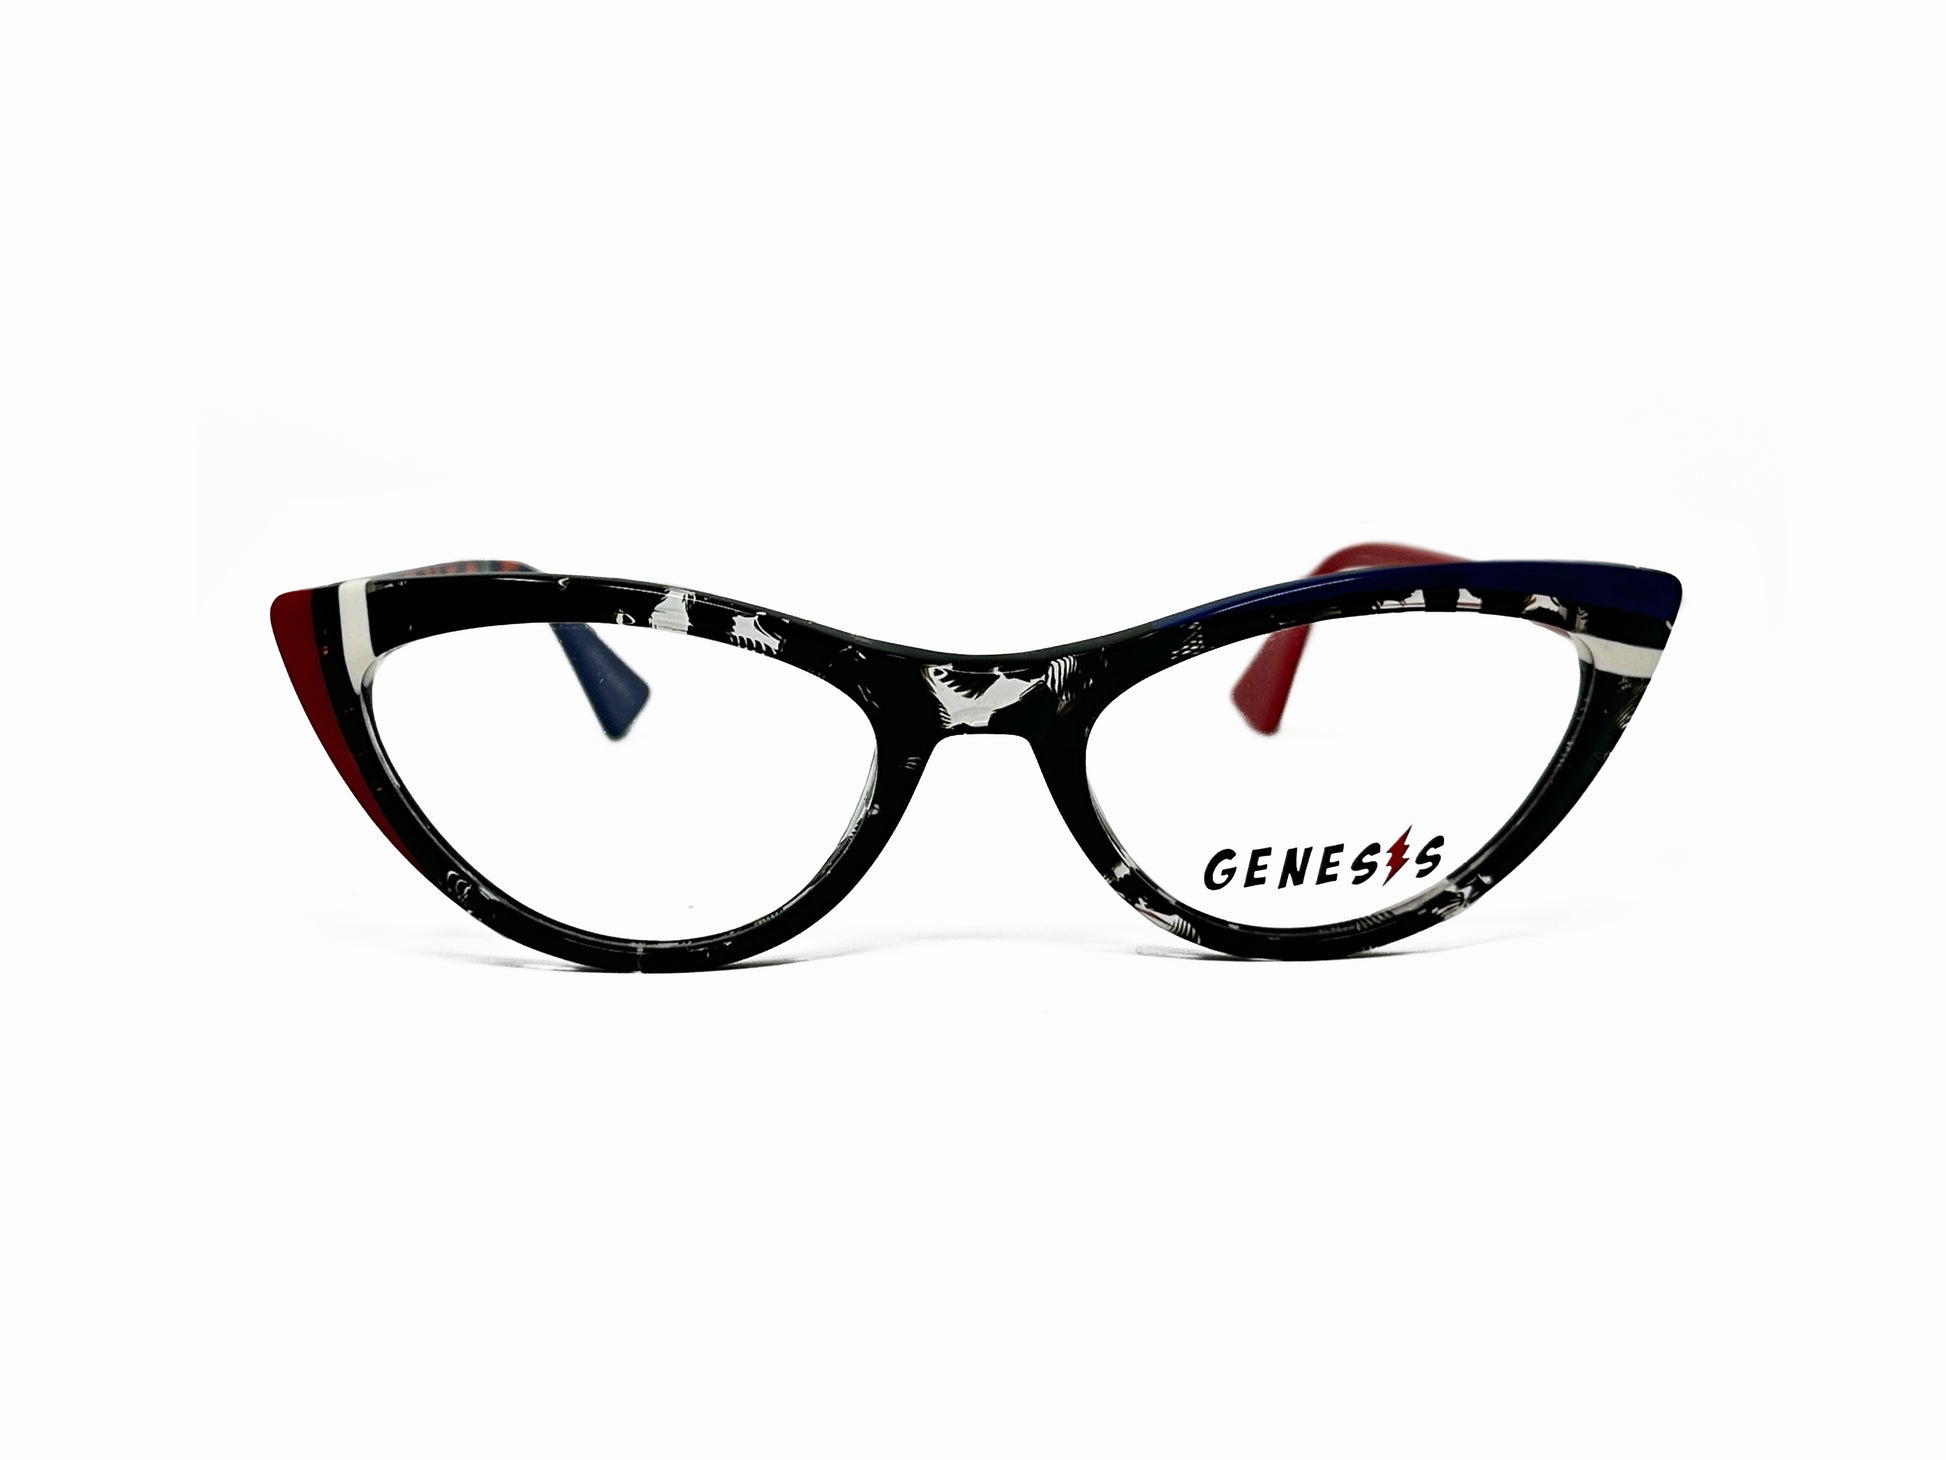 Genesis narrow, cat-eye, acetate optical frame. Model: GV1535. Color: 3 - Black with transparent pattern and red and white stripes on corner of frame. Front view. 